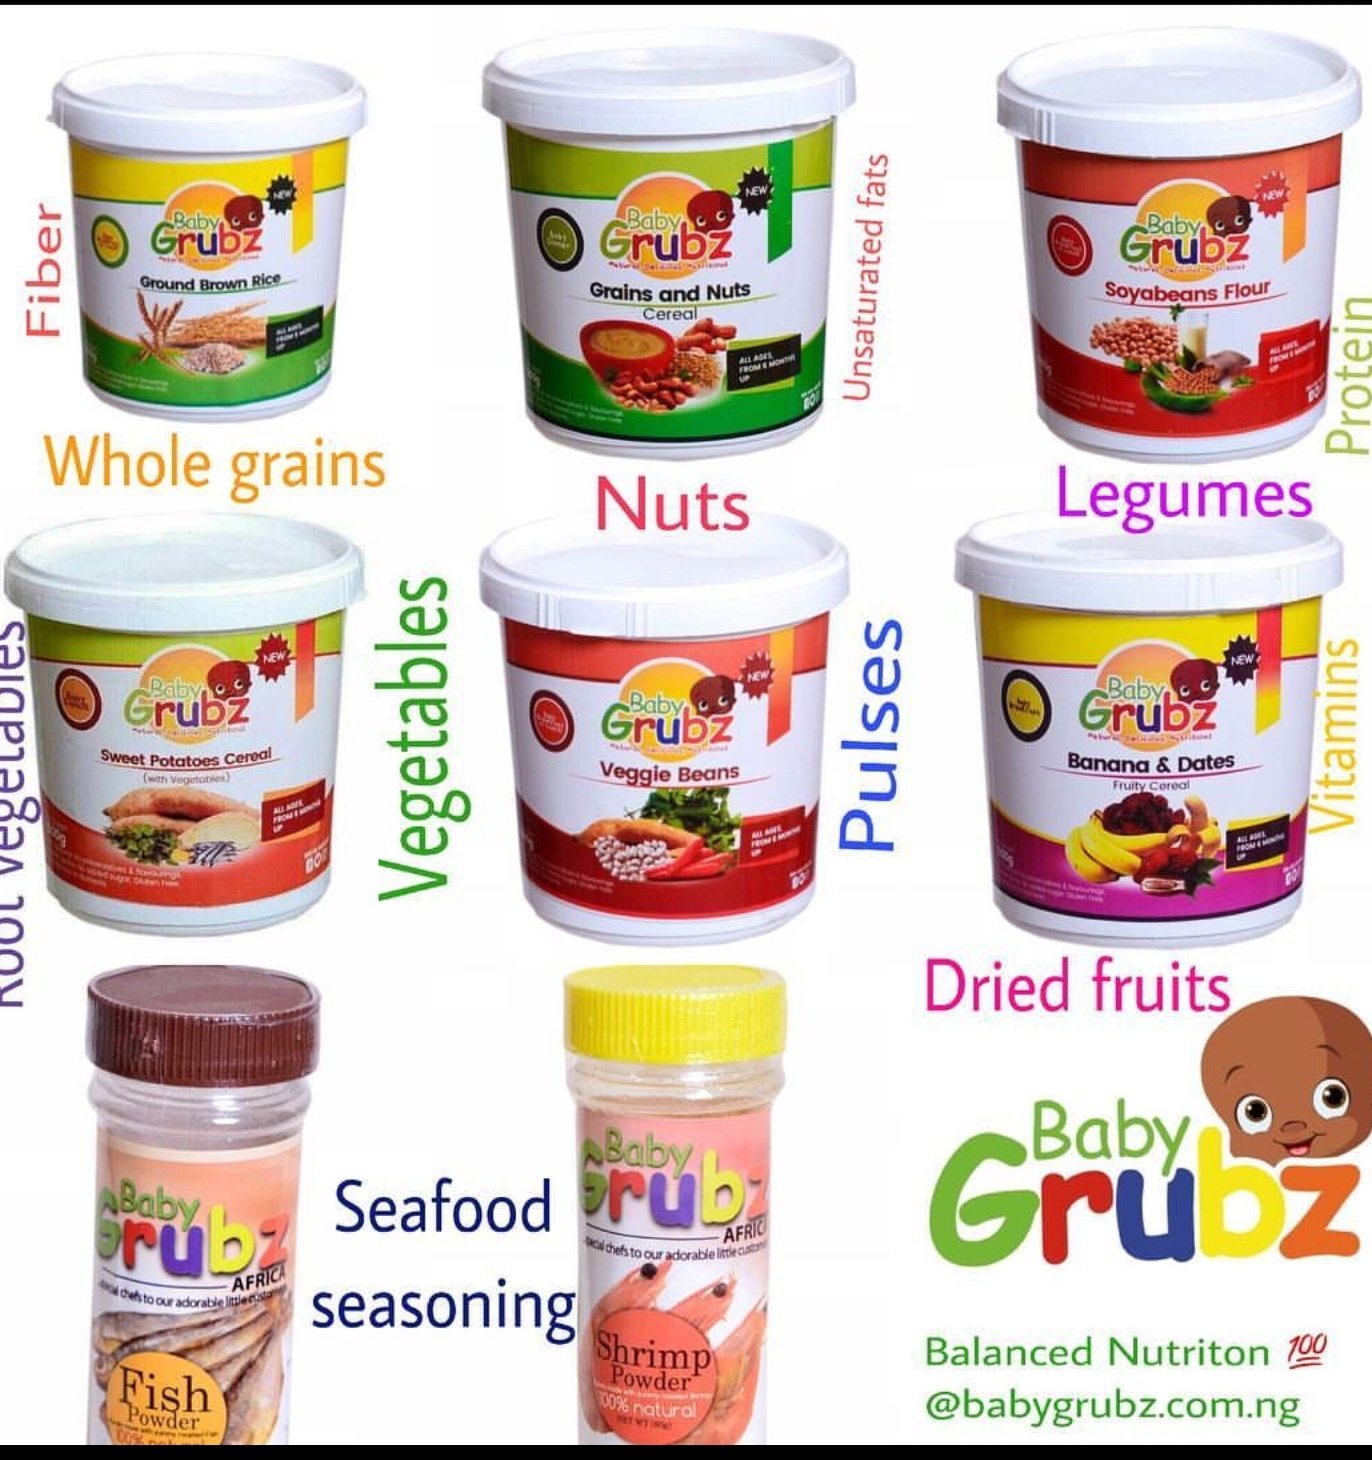 Havilah Foodies and Frutz on X: All baby grubz foods are available  @HavilahFoodies. We are open for business and located at Suite 210, Arcade  Slots Plaza, Surulere, Oke Bola, opposite Ibadan Boys